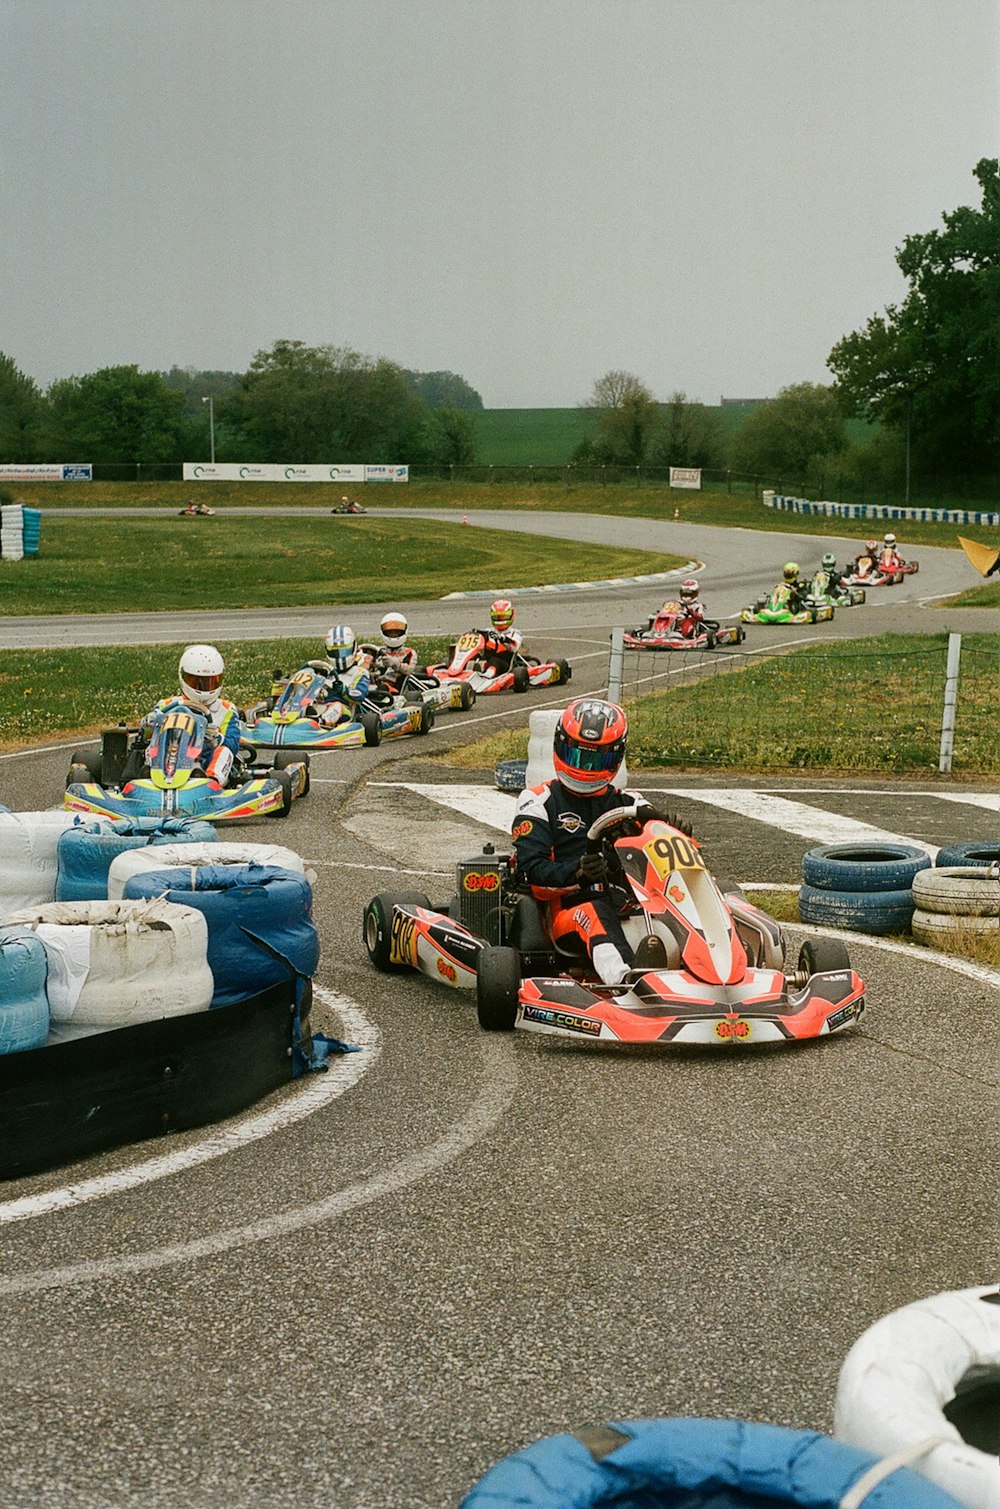 a group of people riding go karts on a track